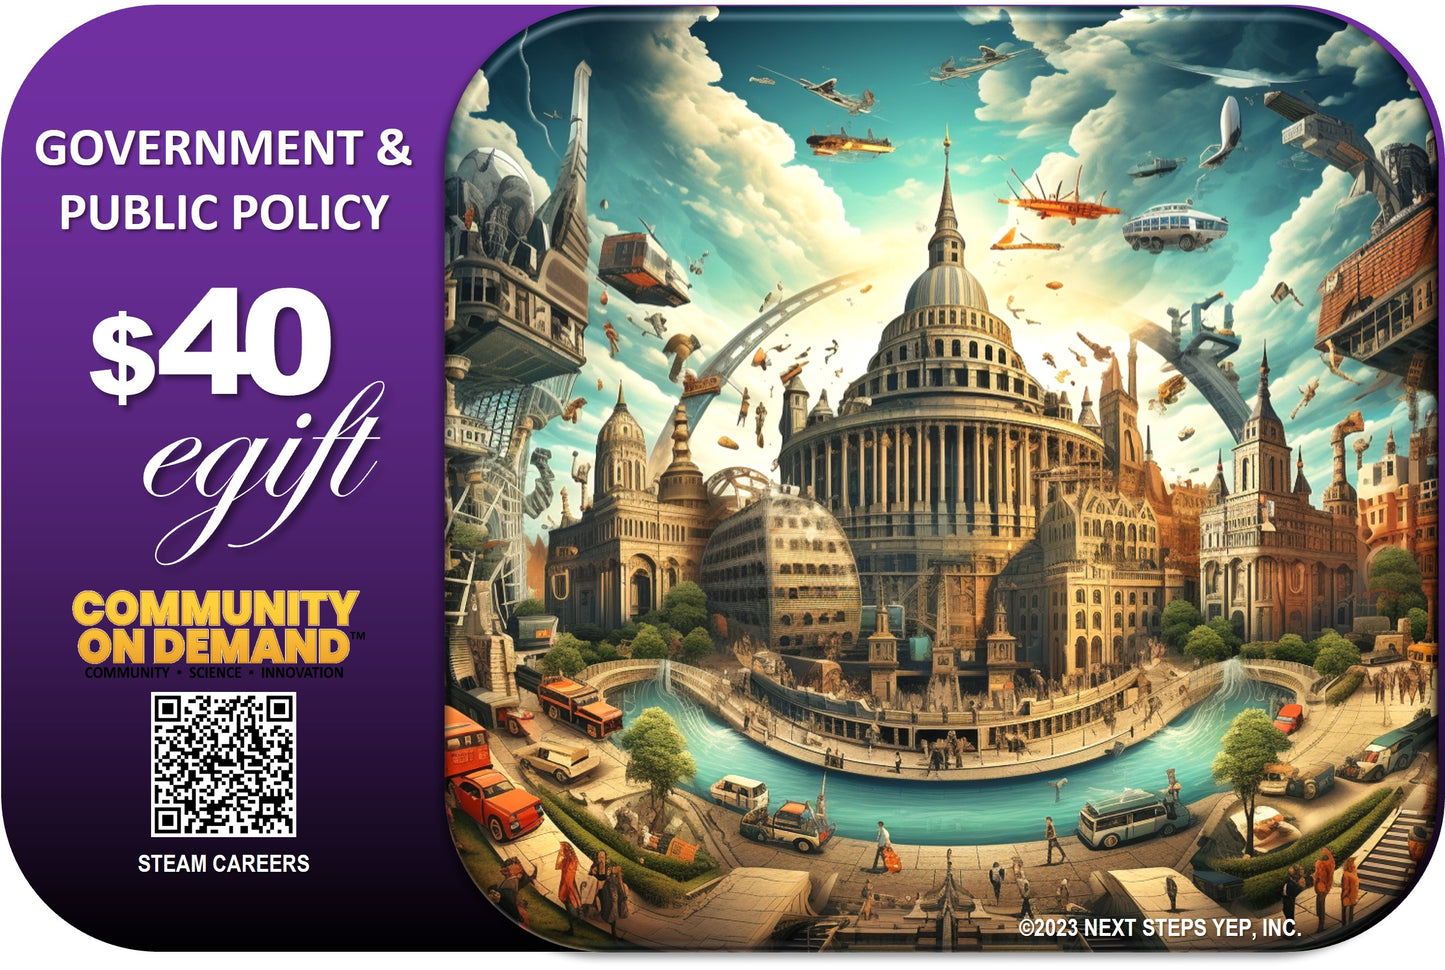 Government & Public Policy eGift Card Sponsorship